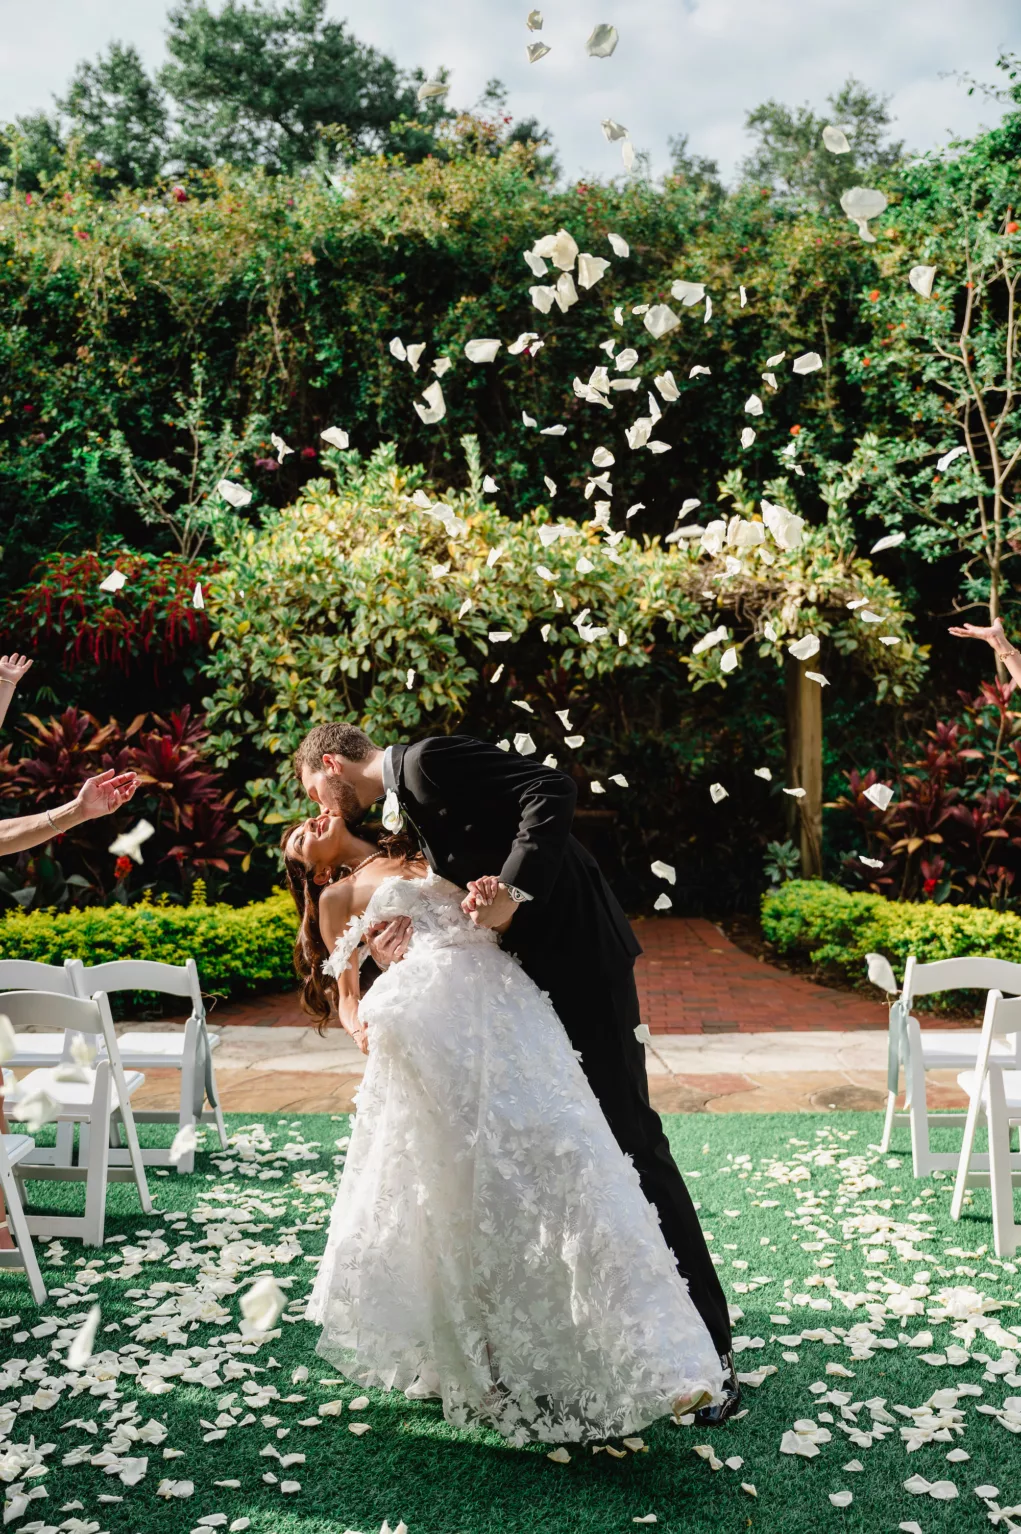 Bride and Groom Wedding Ceremony Flower Petal Toss Ideas | Venue Sunken Garden | Tampa Photography and Videography Iyrus Weddings